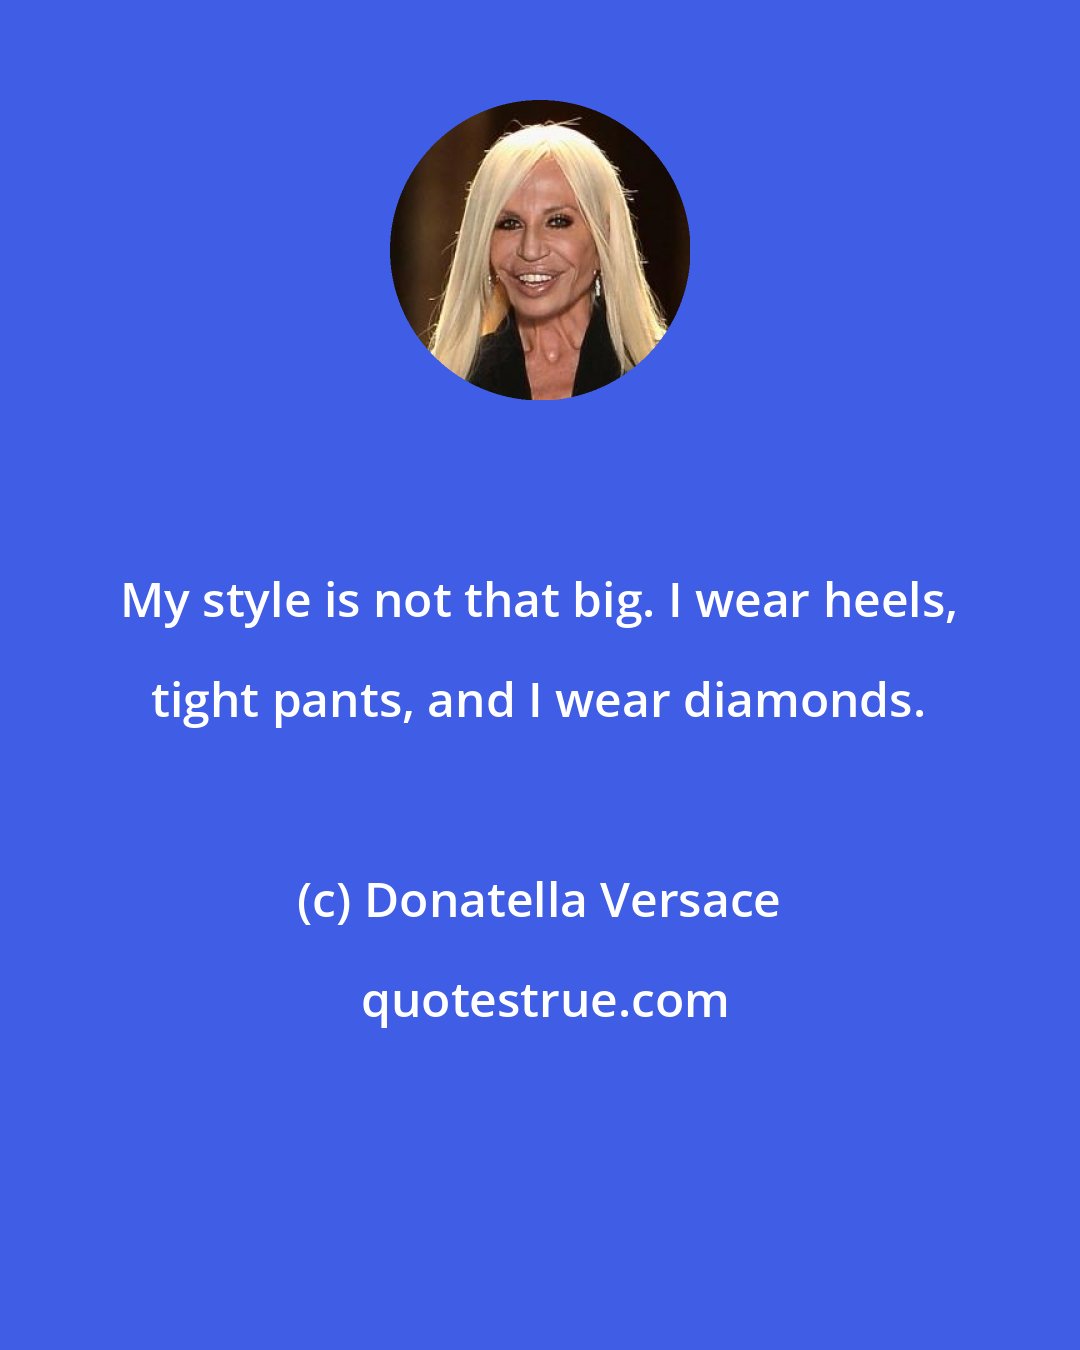 Donatella Versace: My style is not that big. I wear heels, tight pants, and I wear diamonds.